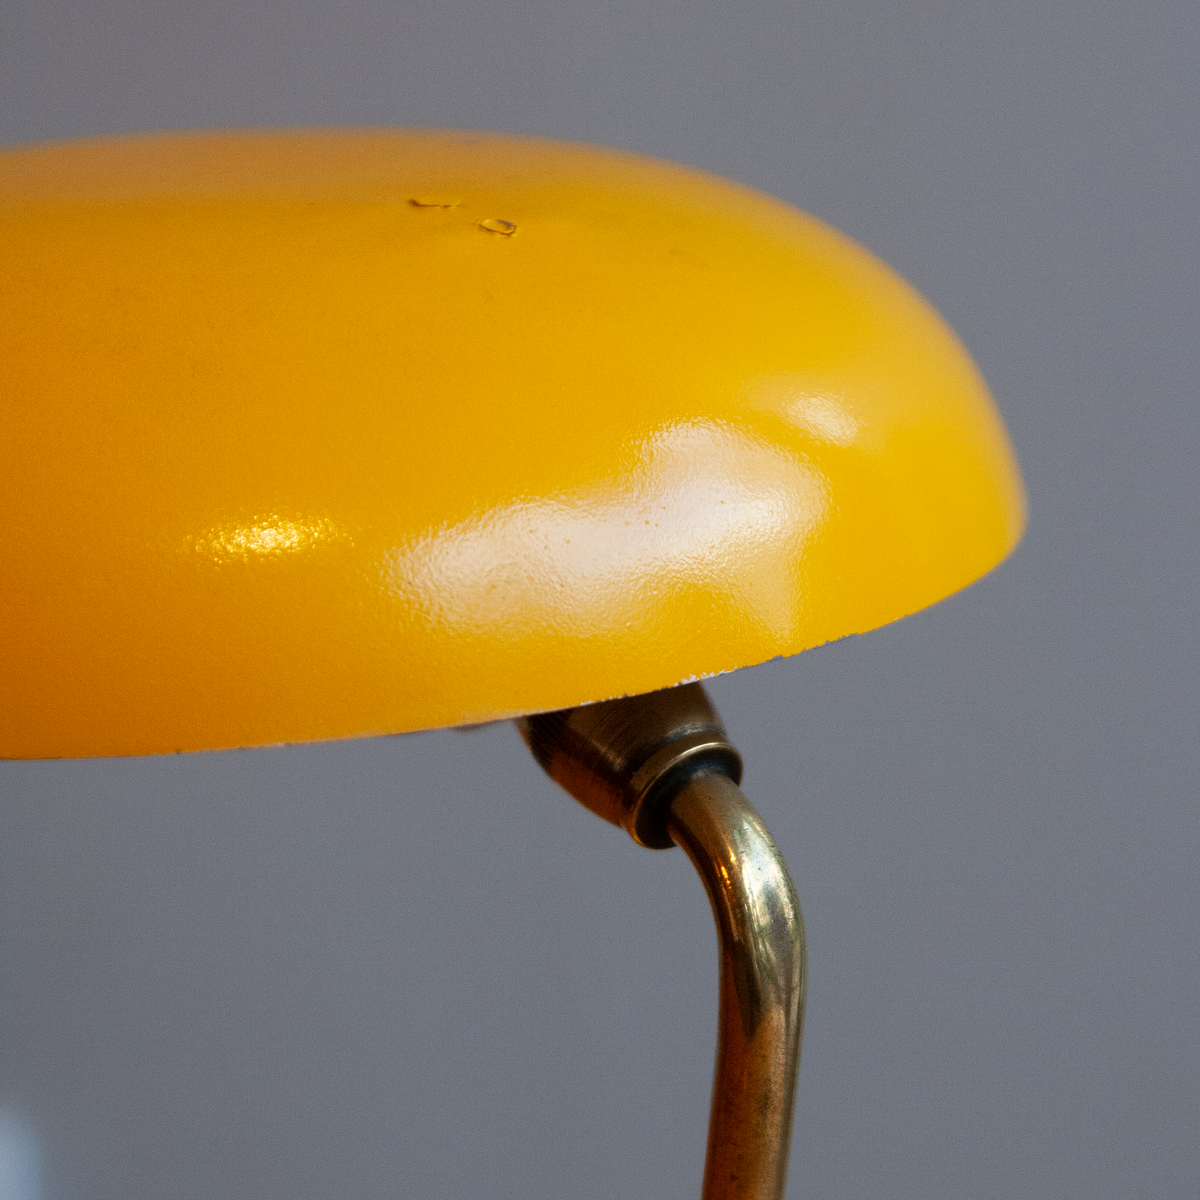 Yellow Library Lamp / France, 1940s.